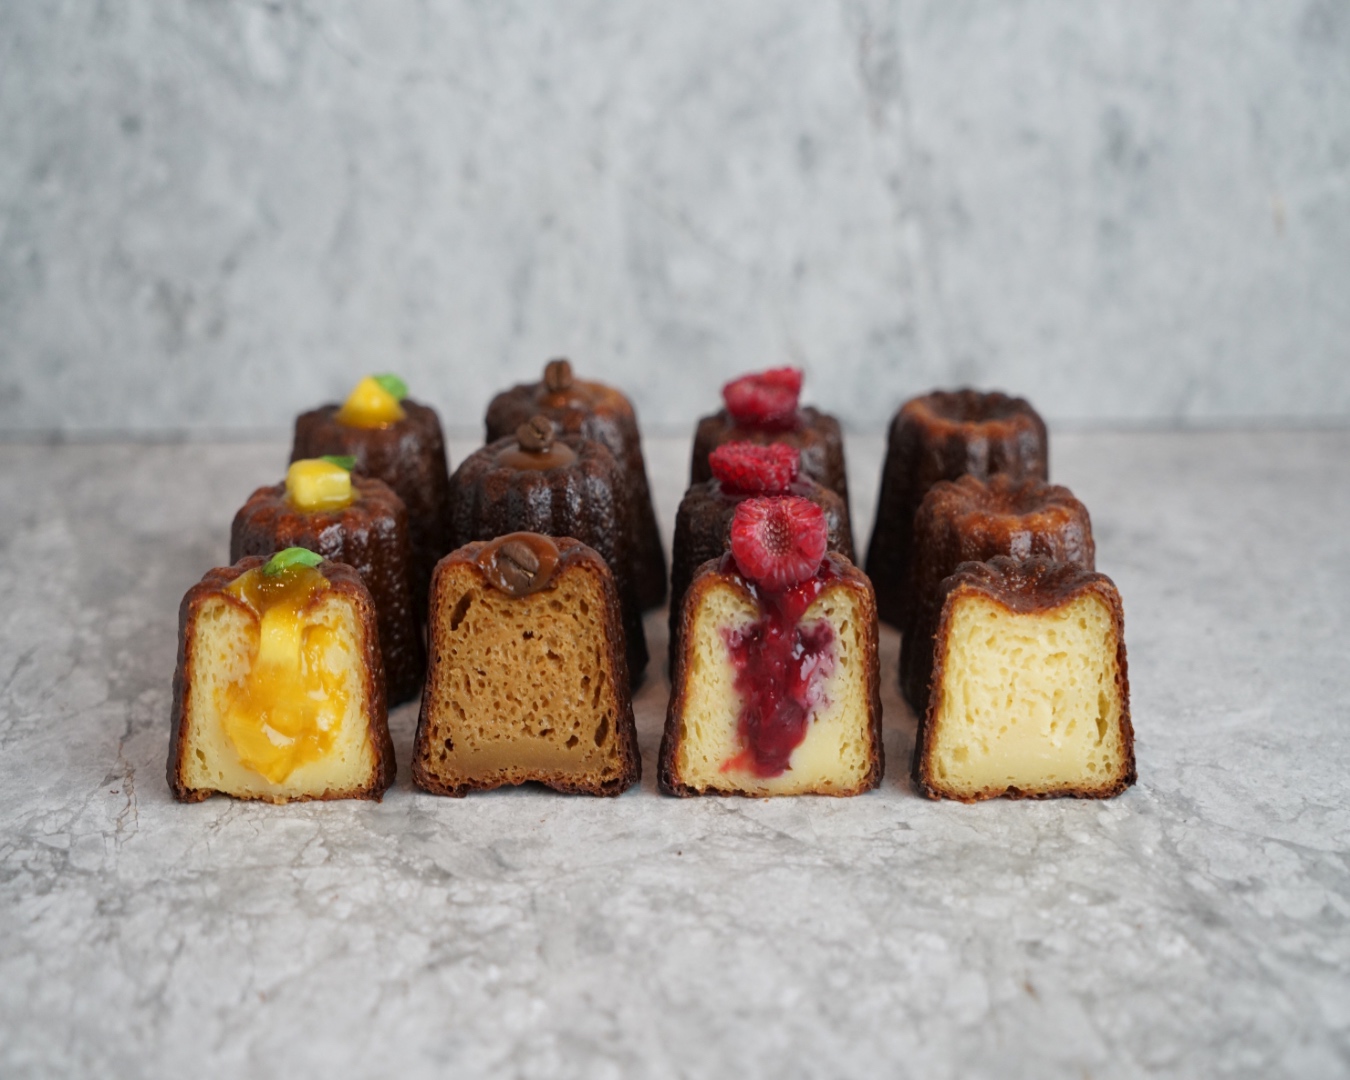 Four cross-sections of canele pastries - lemon curd, raspberry, plain and ginger - on a marble bench